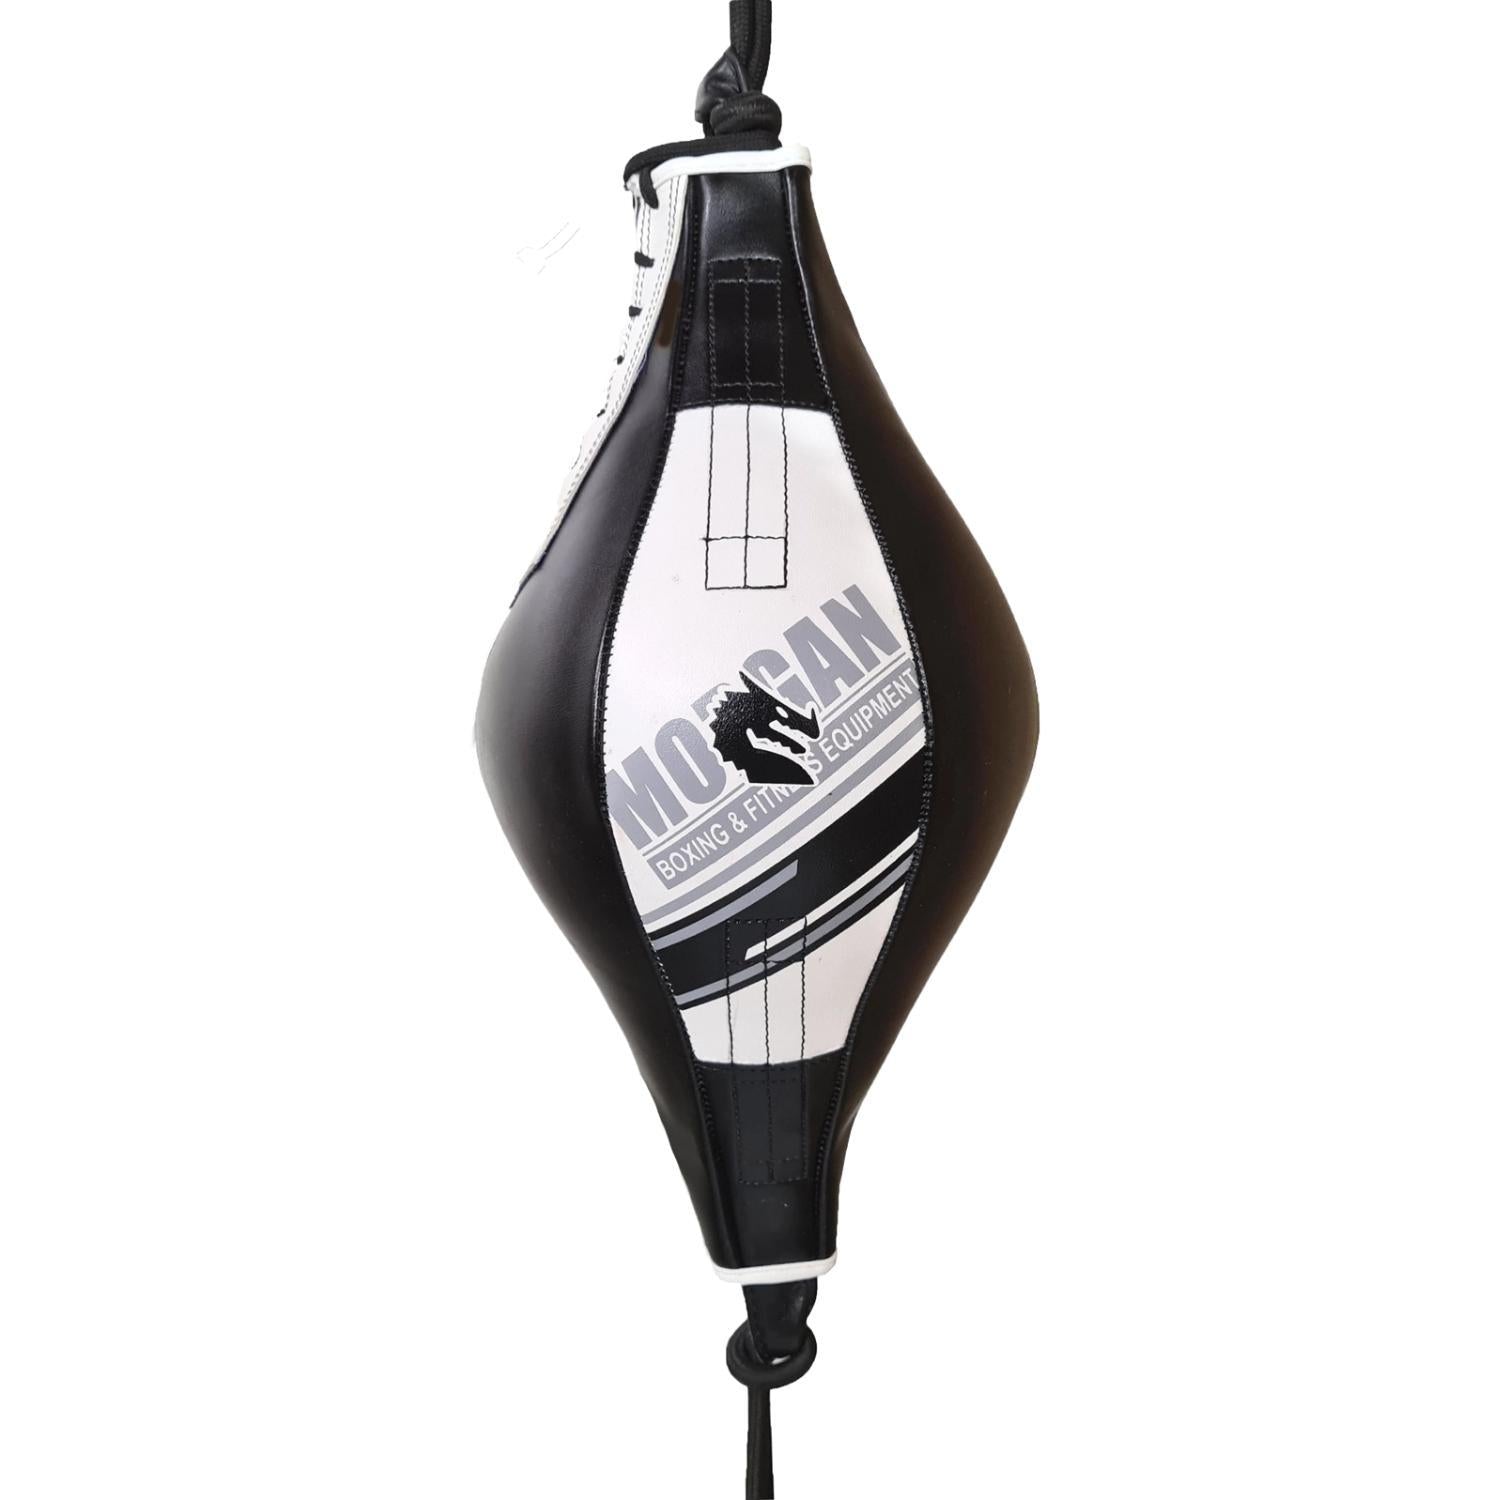 A floor-to-ceiling punch ball is an excellent way for boxers to train their body and enhance their striking power. The Morgan Aventus floor-to-ceiling ball is an essential piece of equipment for improving hand speed, hand-eye coordination, and reaction time.35cm in length and 16cm in diameter. Comes with a rubber bungee cord for adjustability and calibration